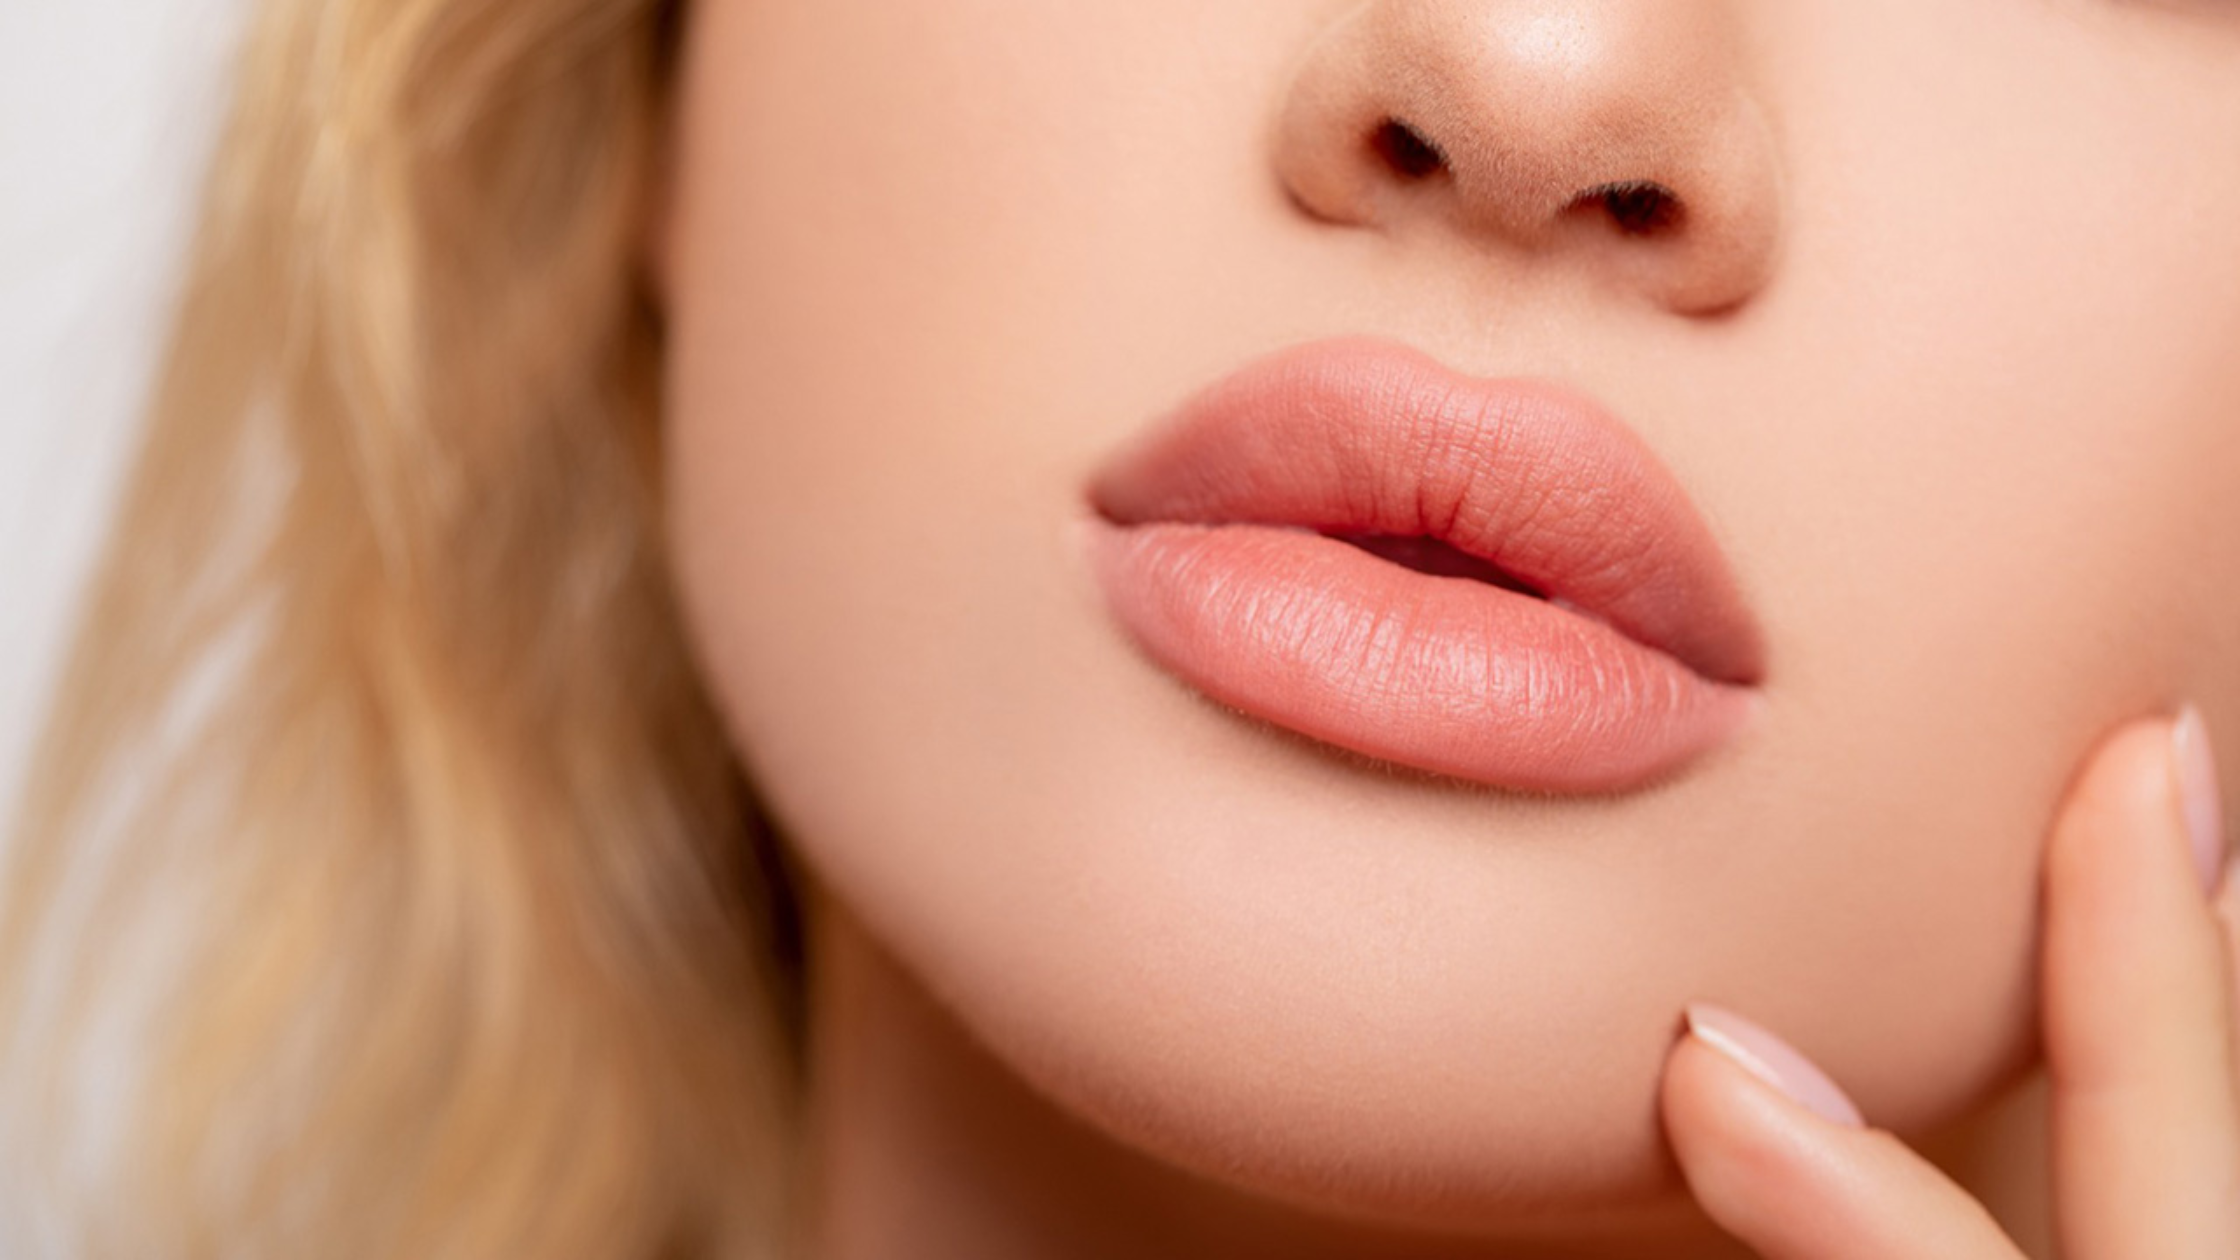 Lips Care Guide: 8 Natural Home Remedies for Chapped Lips